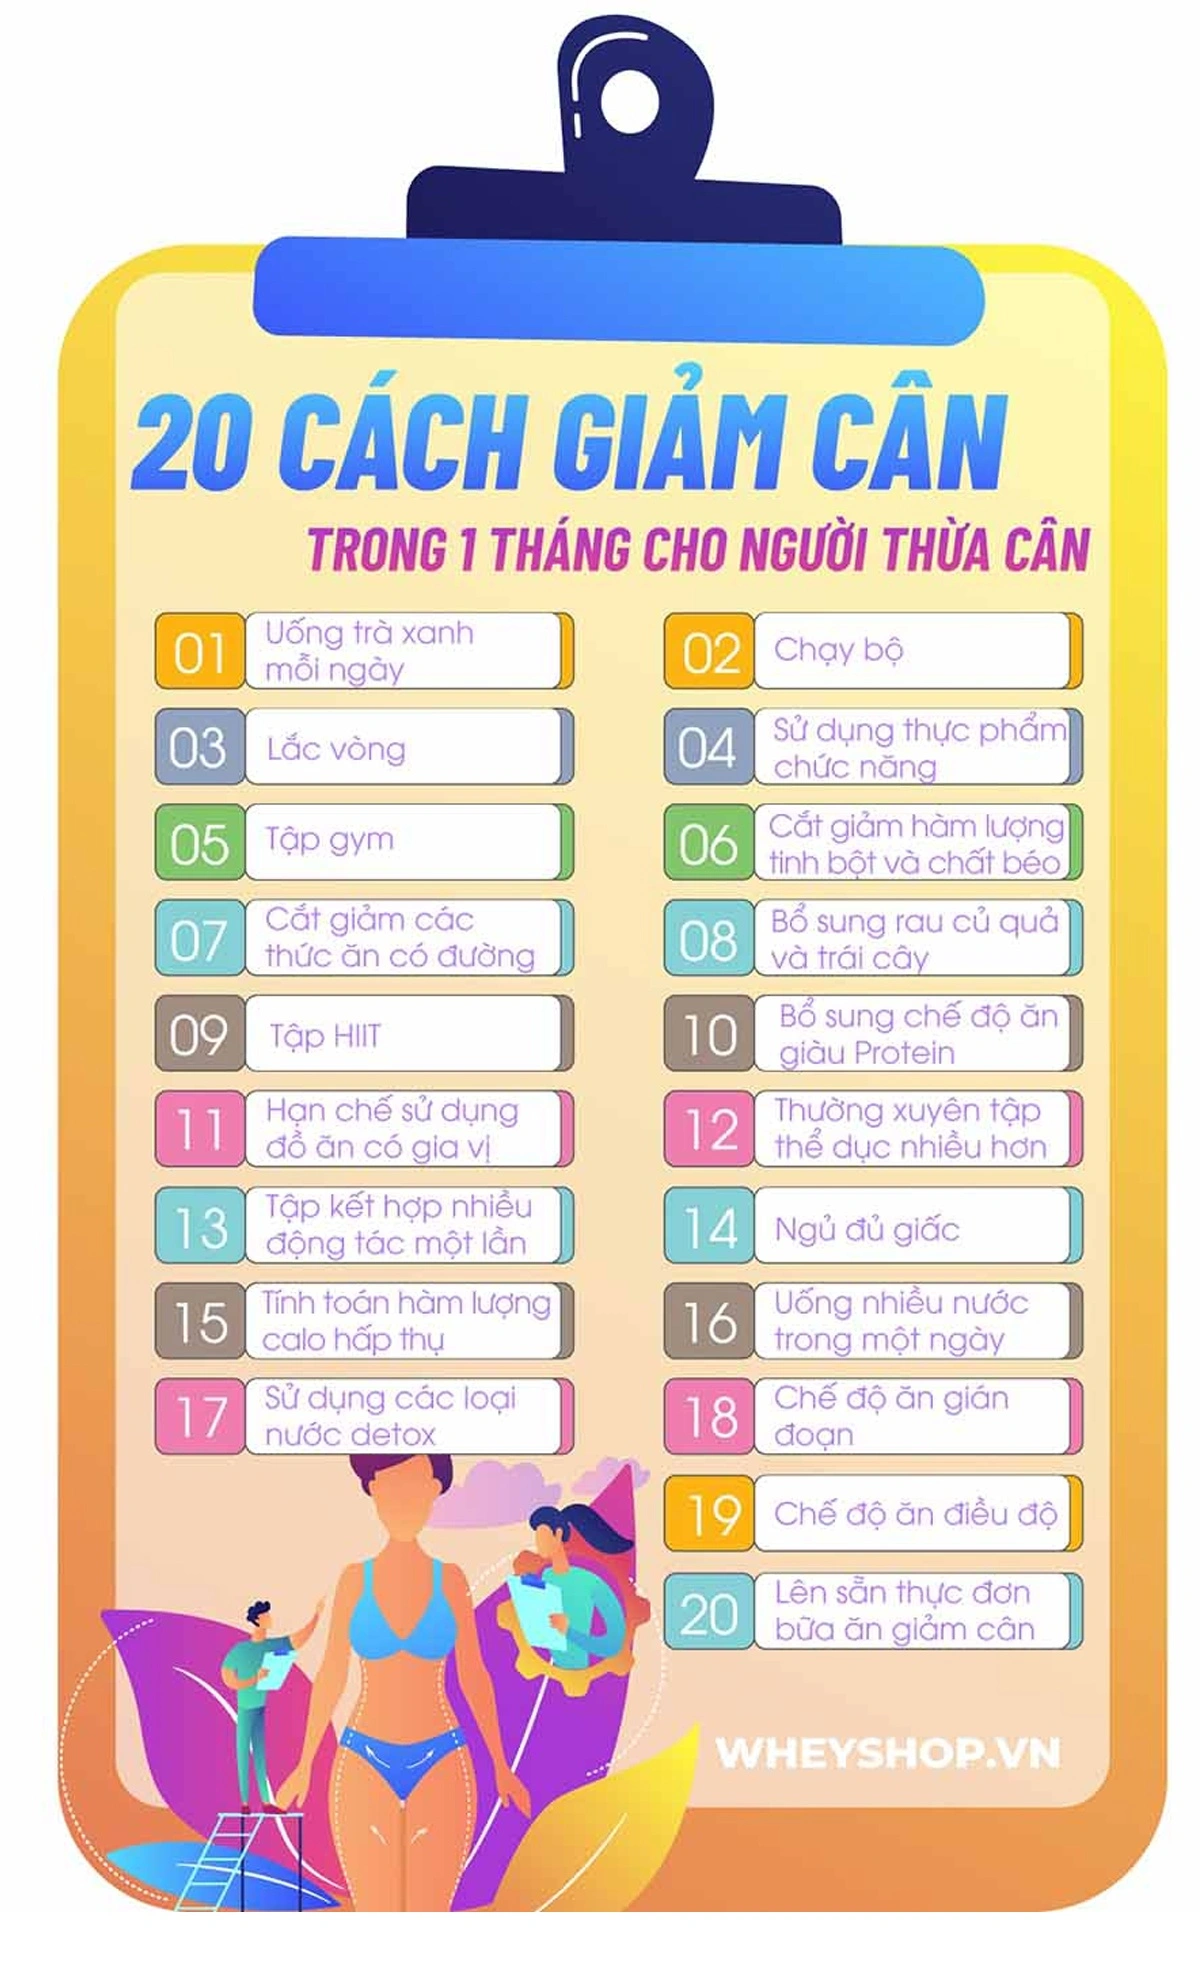 20-cach-giam-can-trong-1-thang-6